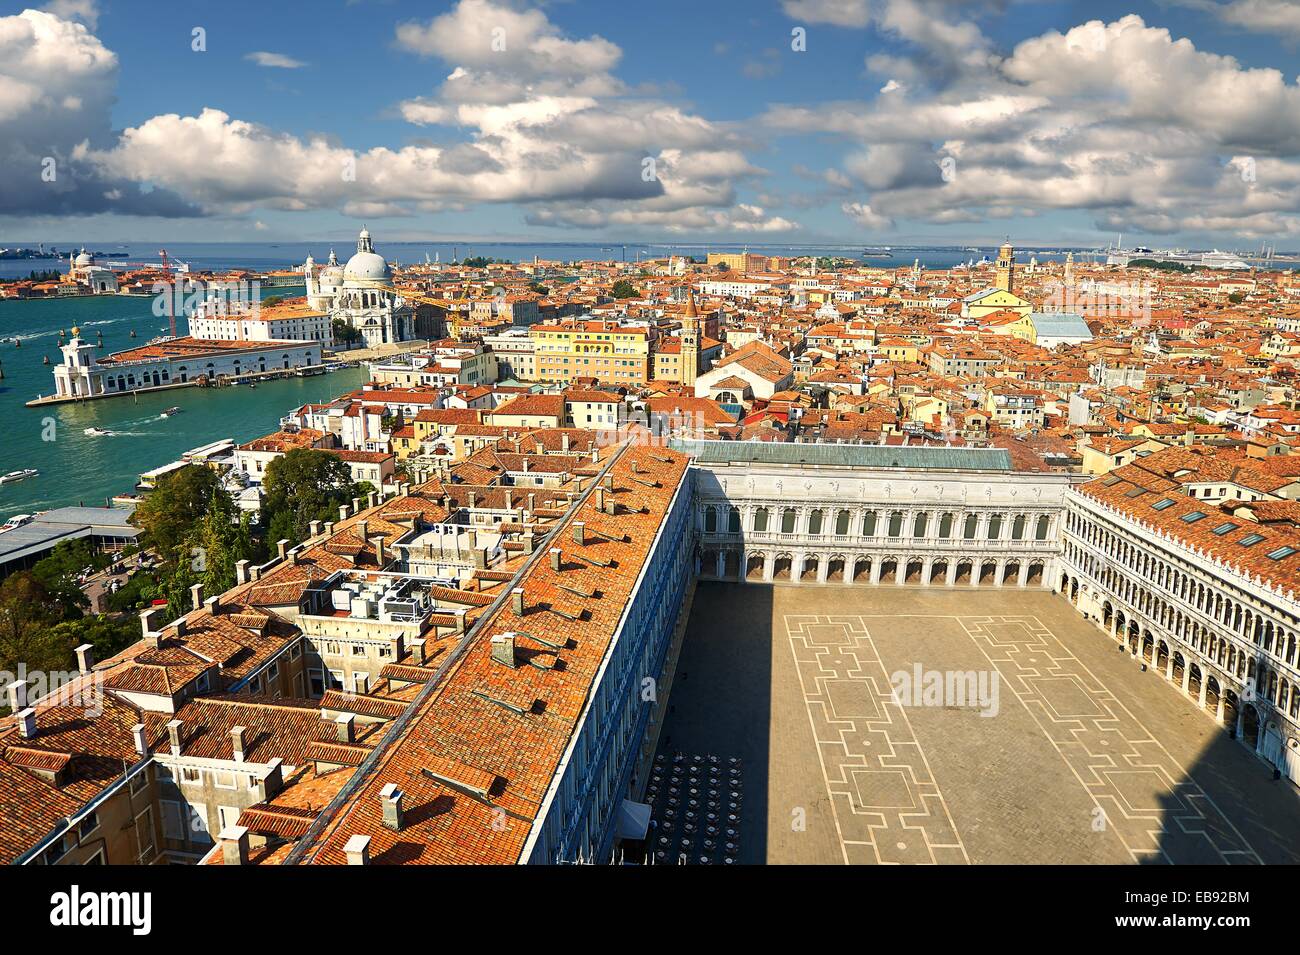 Arial view of St Mark's Square, Venice Italy. Stock Photo